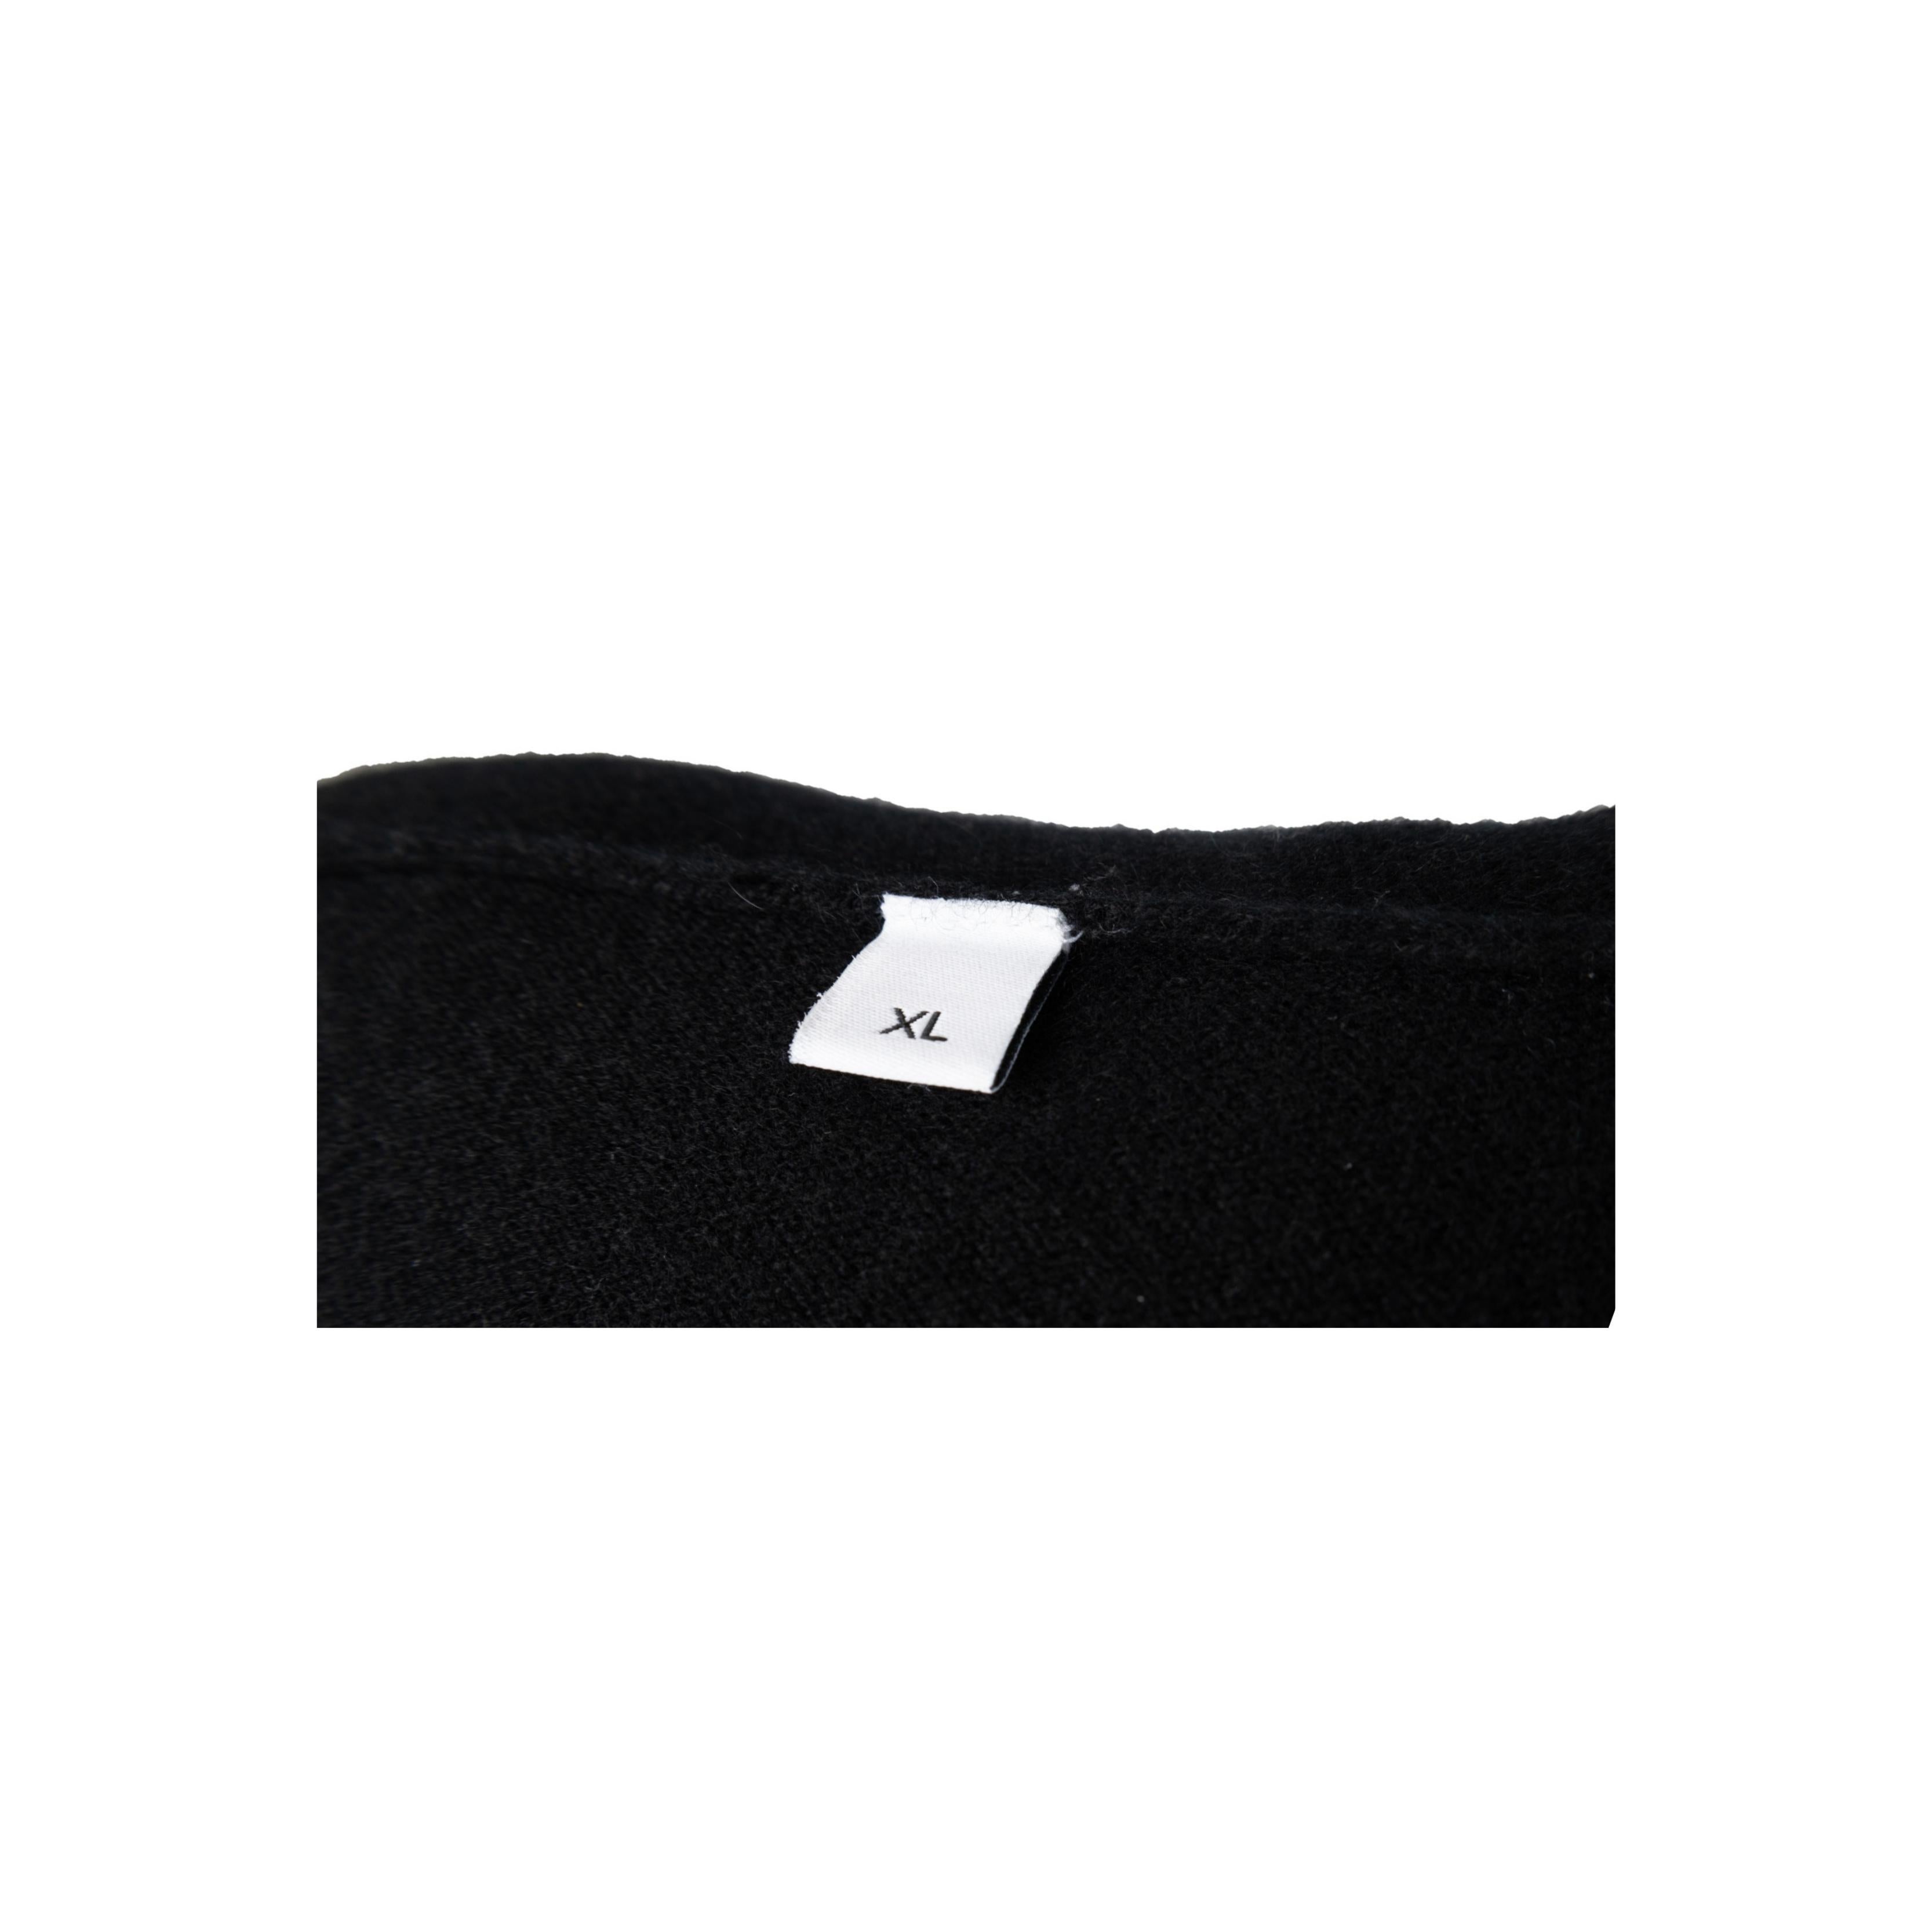 Made in England, this Givenchy sweater is crafted from luxurious cashmere and features a stylish urban aesthetic. The all-black top is a slim fit with long sleeves, a straight hem, ribbed hem and cuffs, and a star patch adorning the chest.

Remarks: